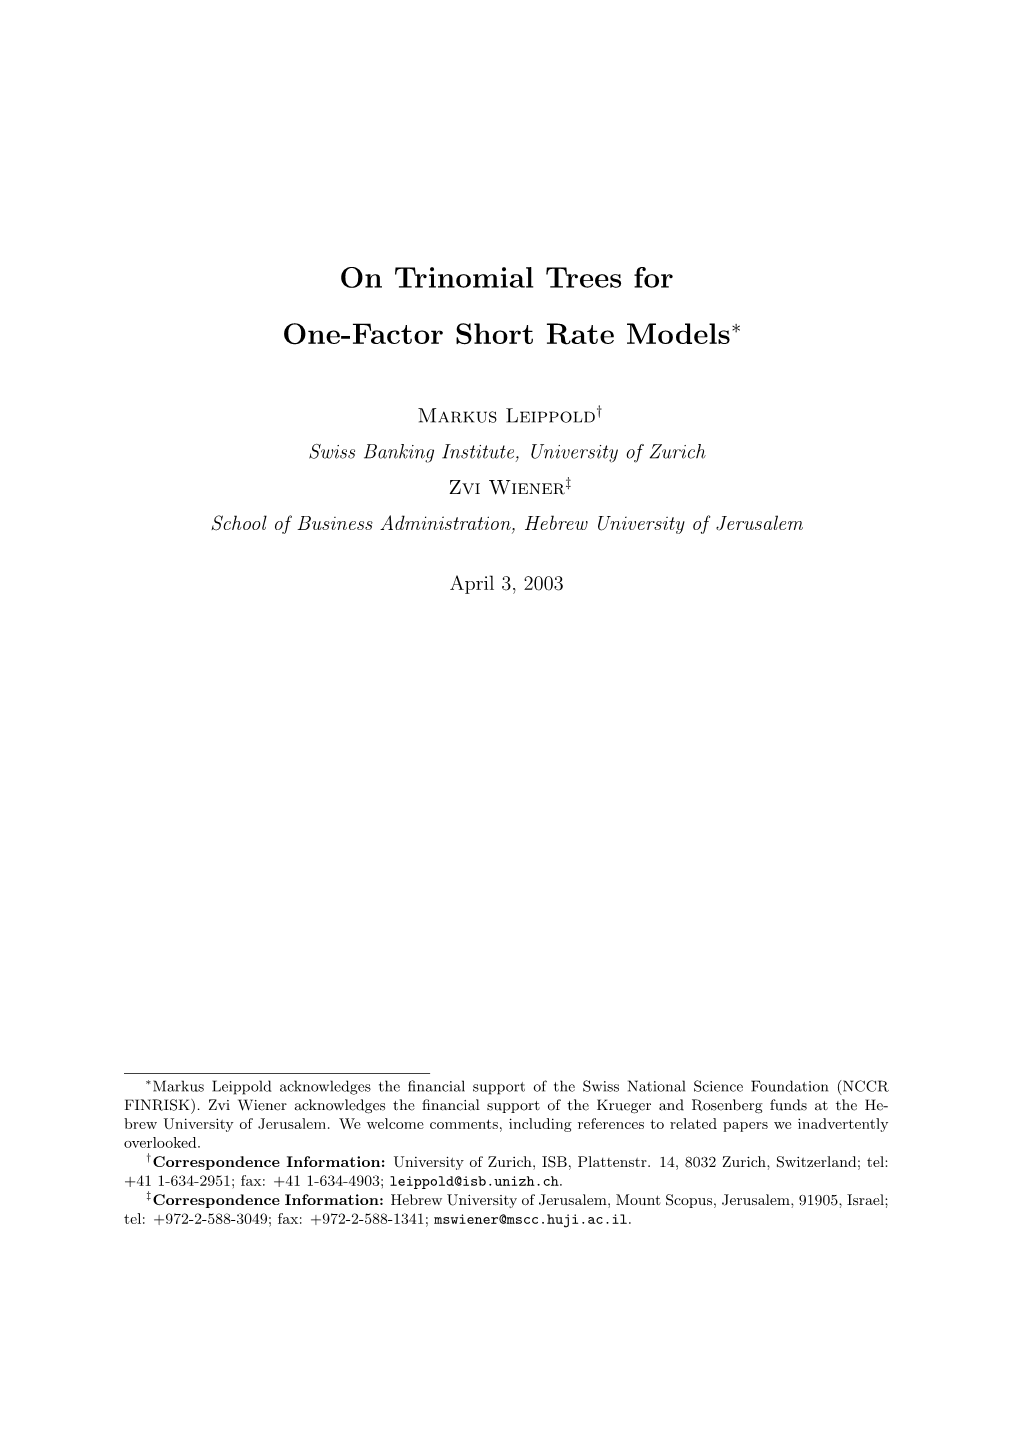 On Trinomial Trees for One-Factor Short Rate Models∗